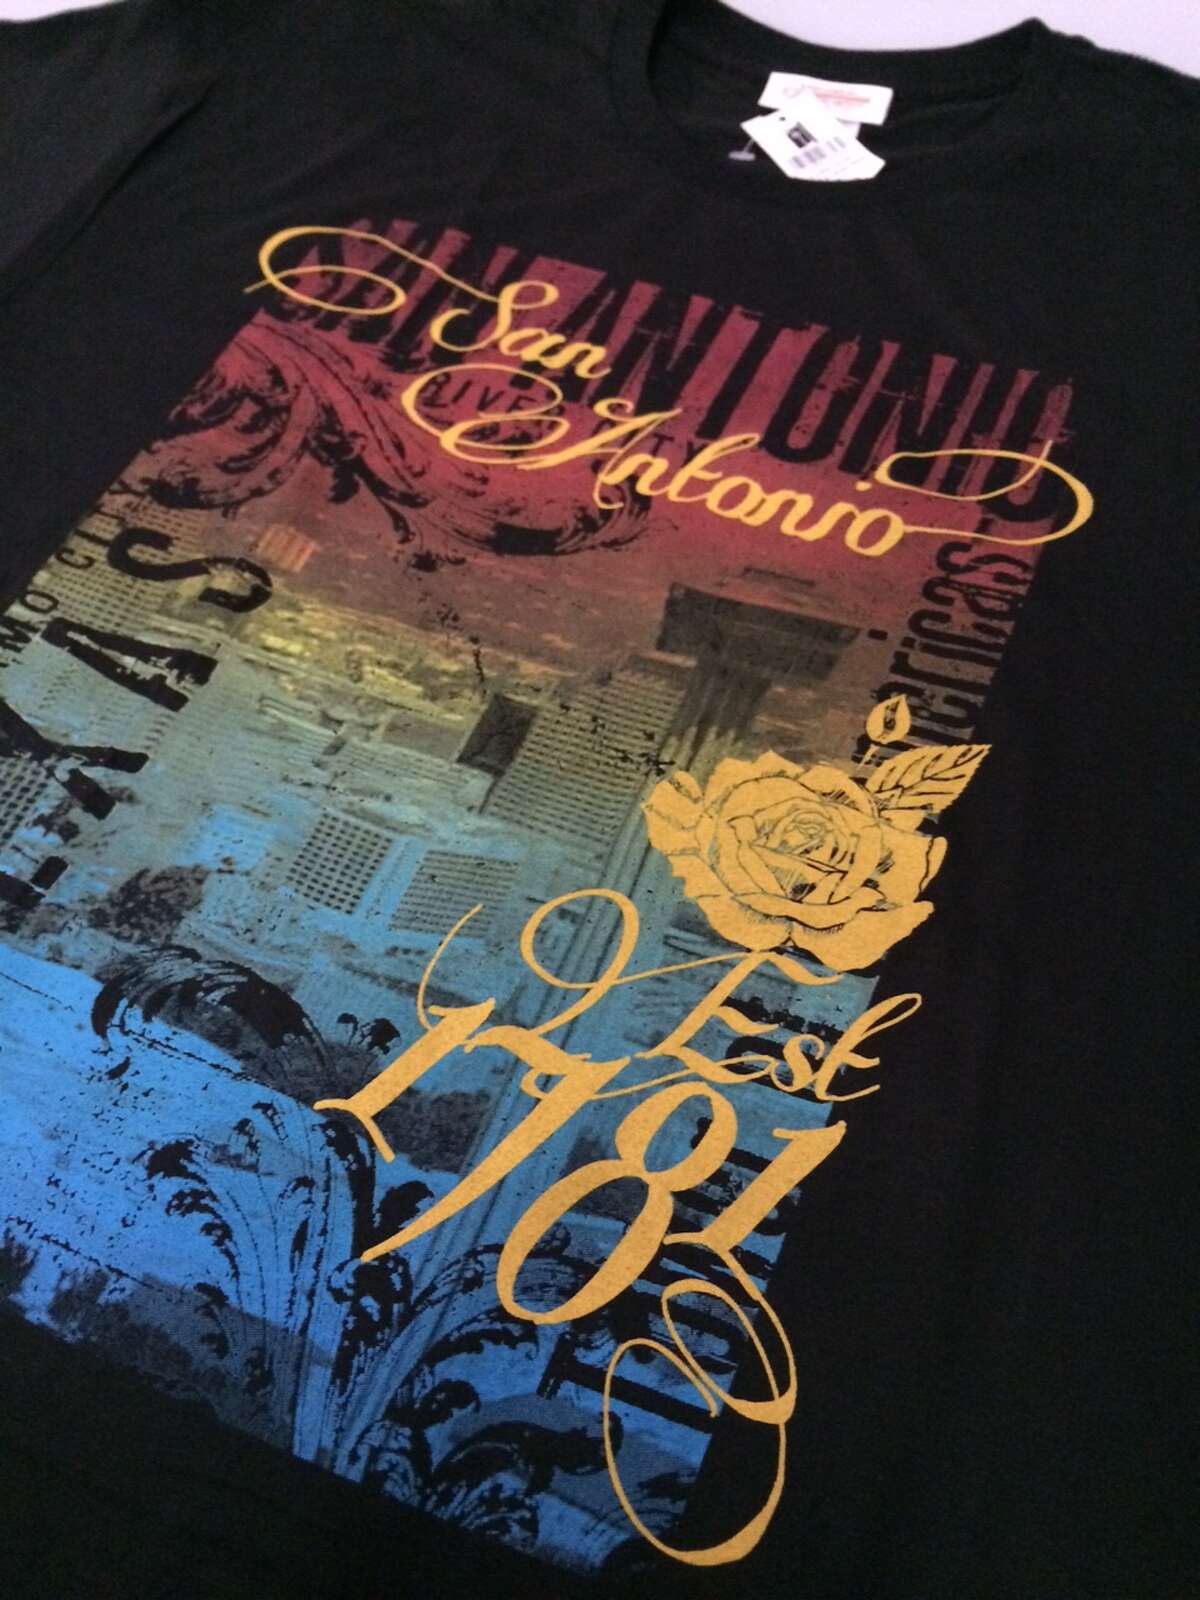 A souvenir shirt for sale in the Tower of Americas gift shop gives the wrong year for the San Antonio's founding. The city was established in 1718. A Tricentennial Commission has gone to work planning the city's 300th anniversary celebration for 2018.